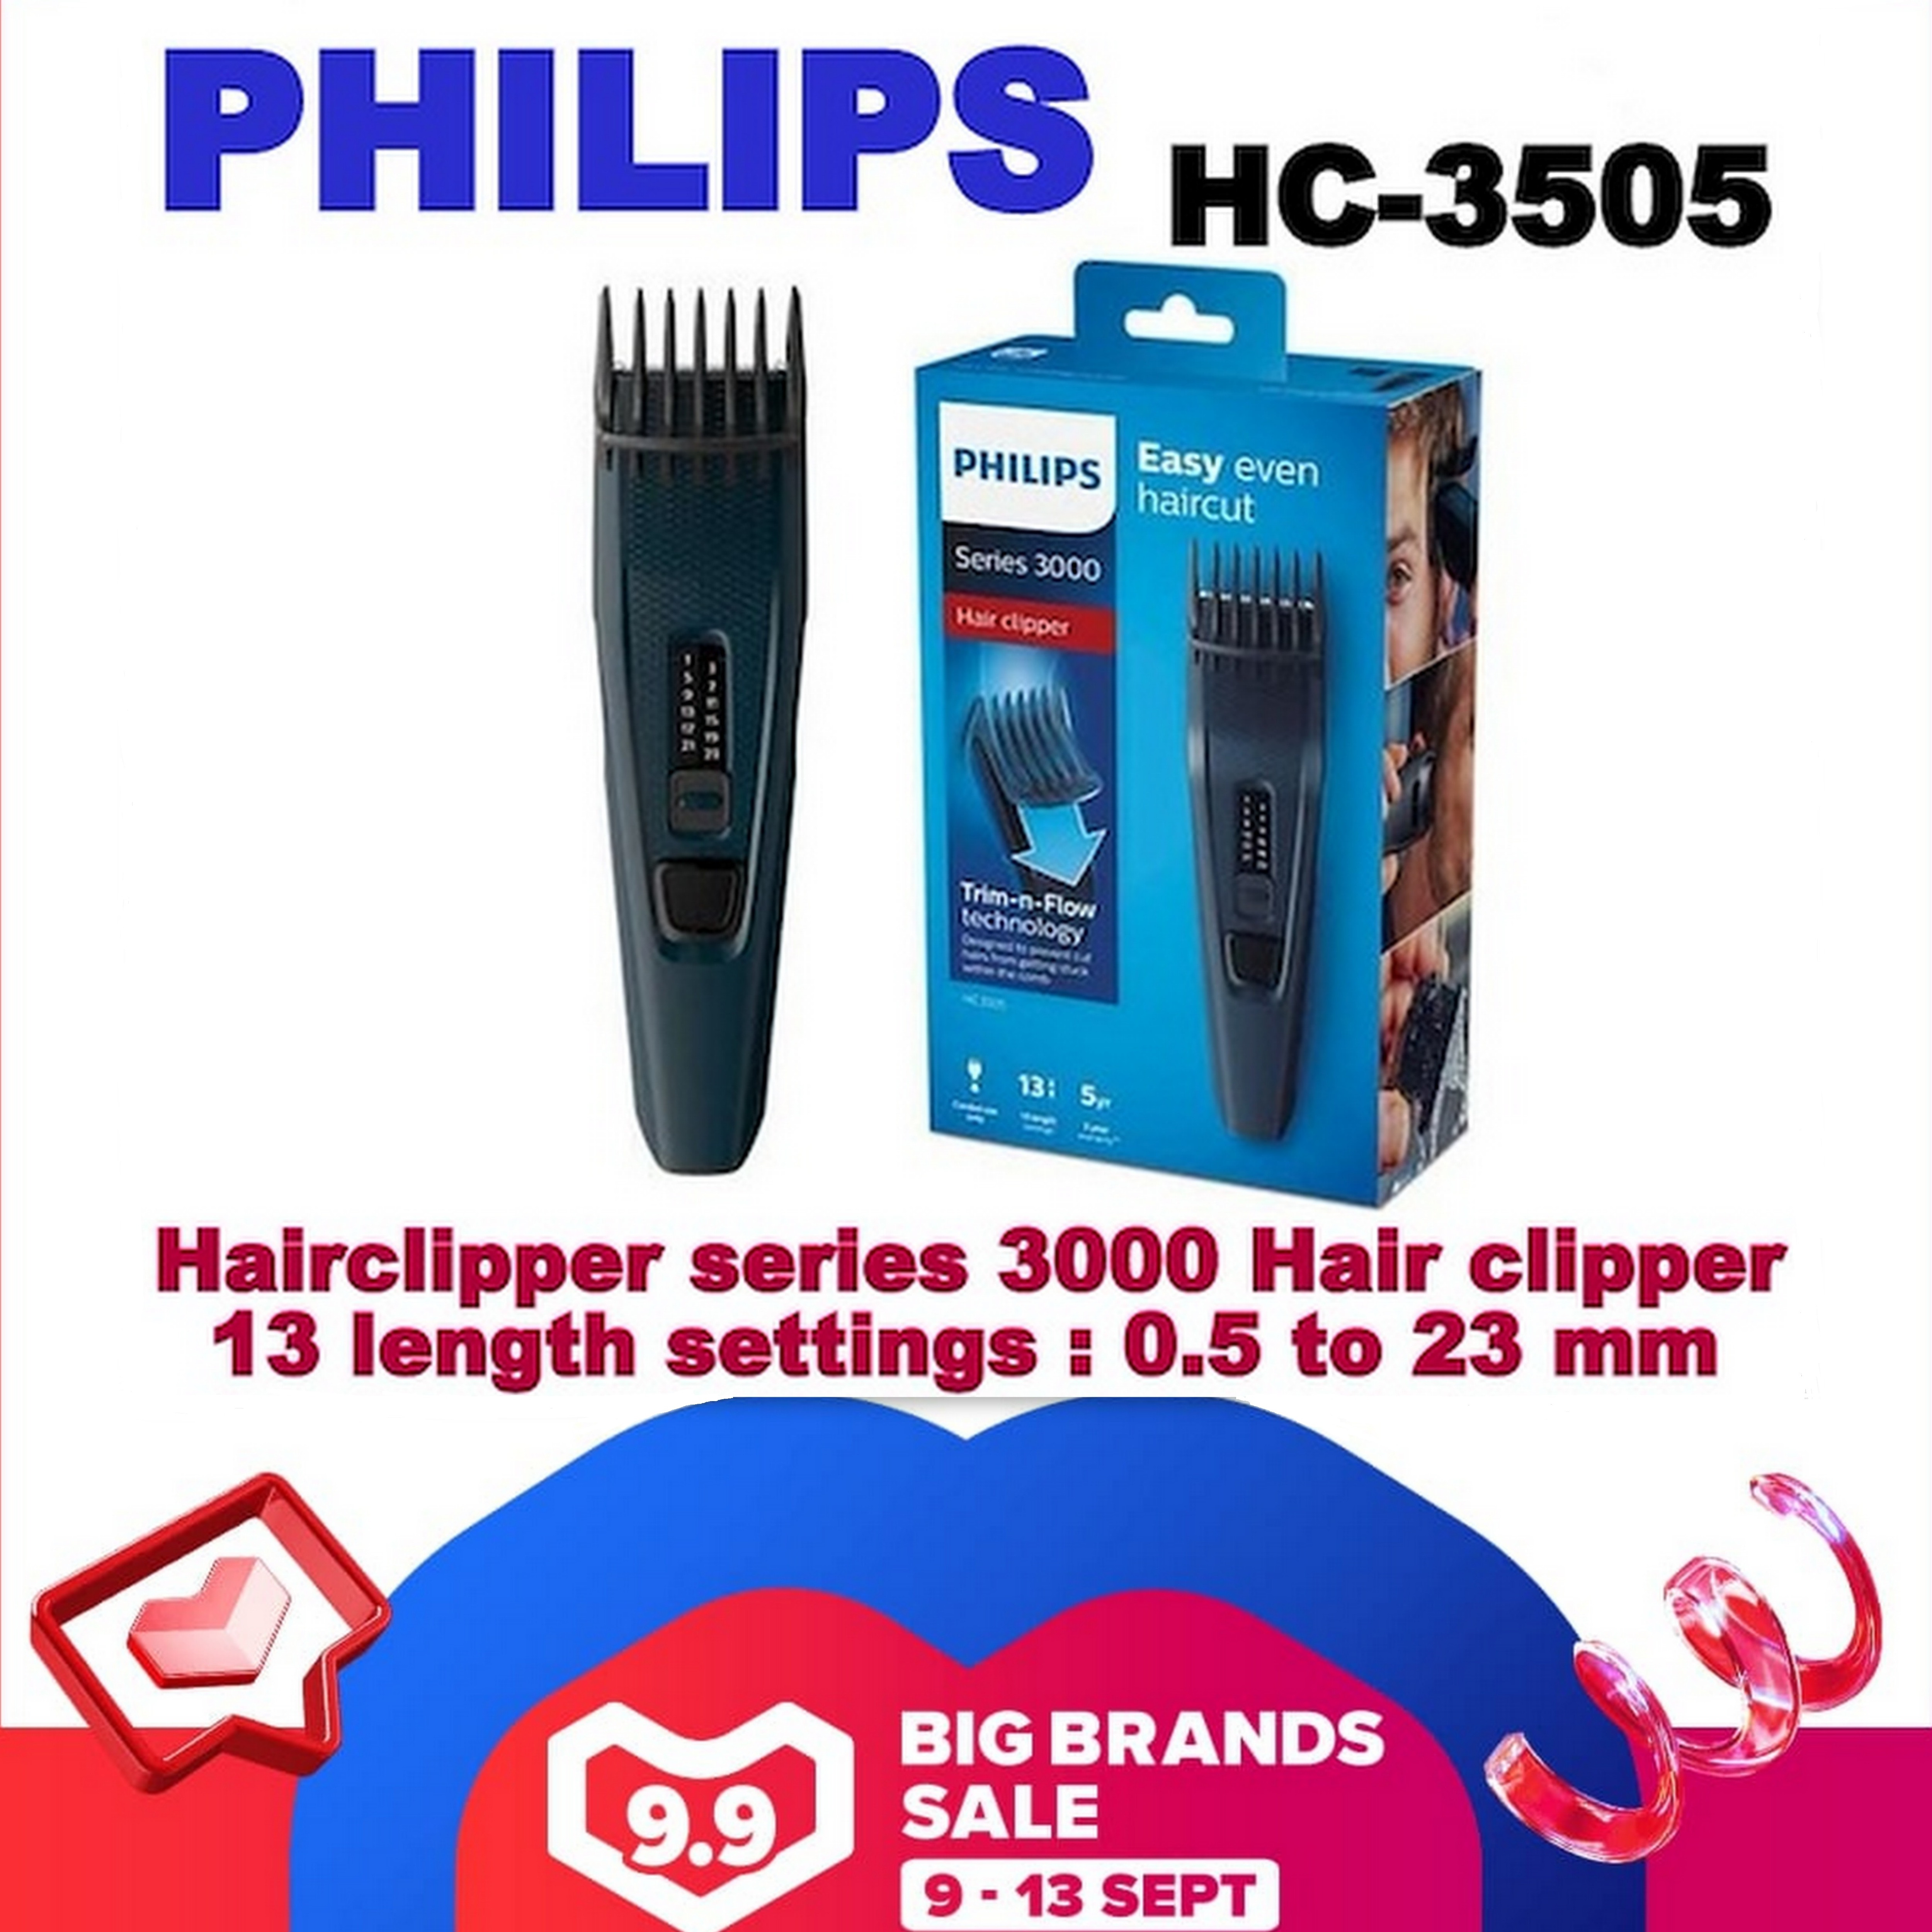 PHILIPS Hairclipper series 3000 Hair clipper HC3505/15 Corded (AC) use only  | Lazada Singapore